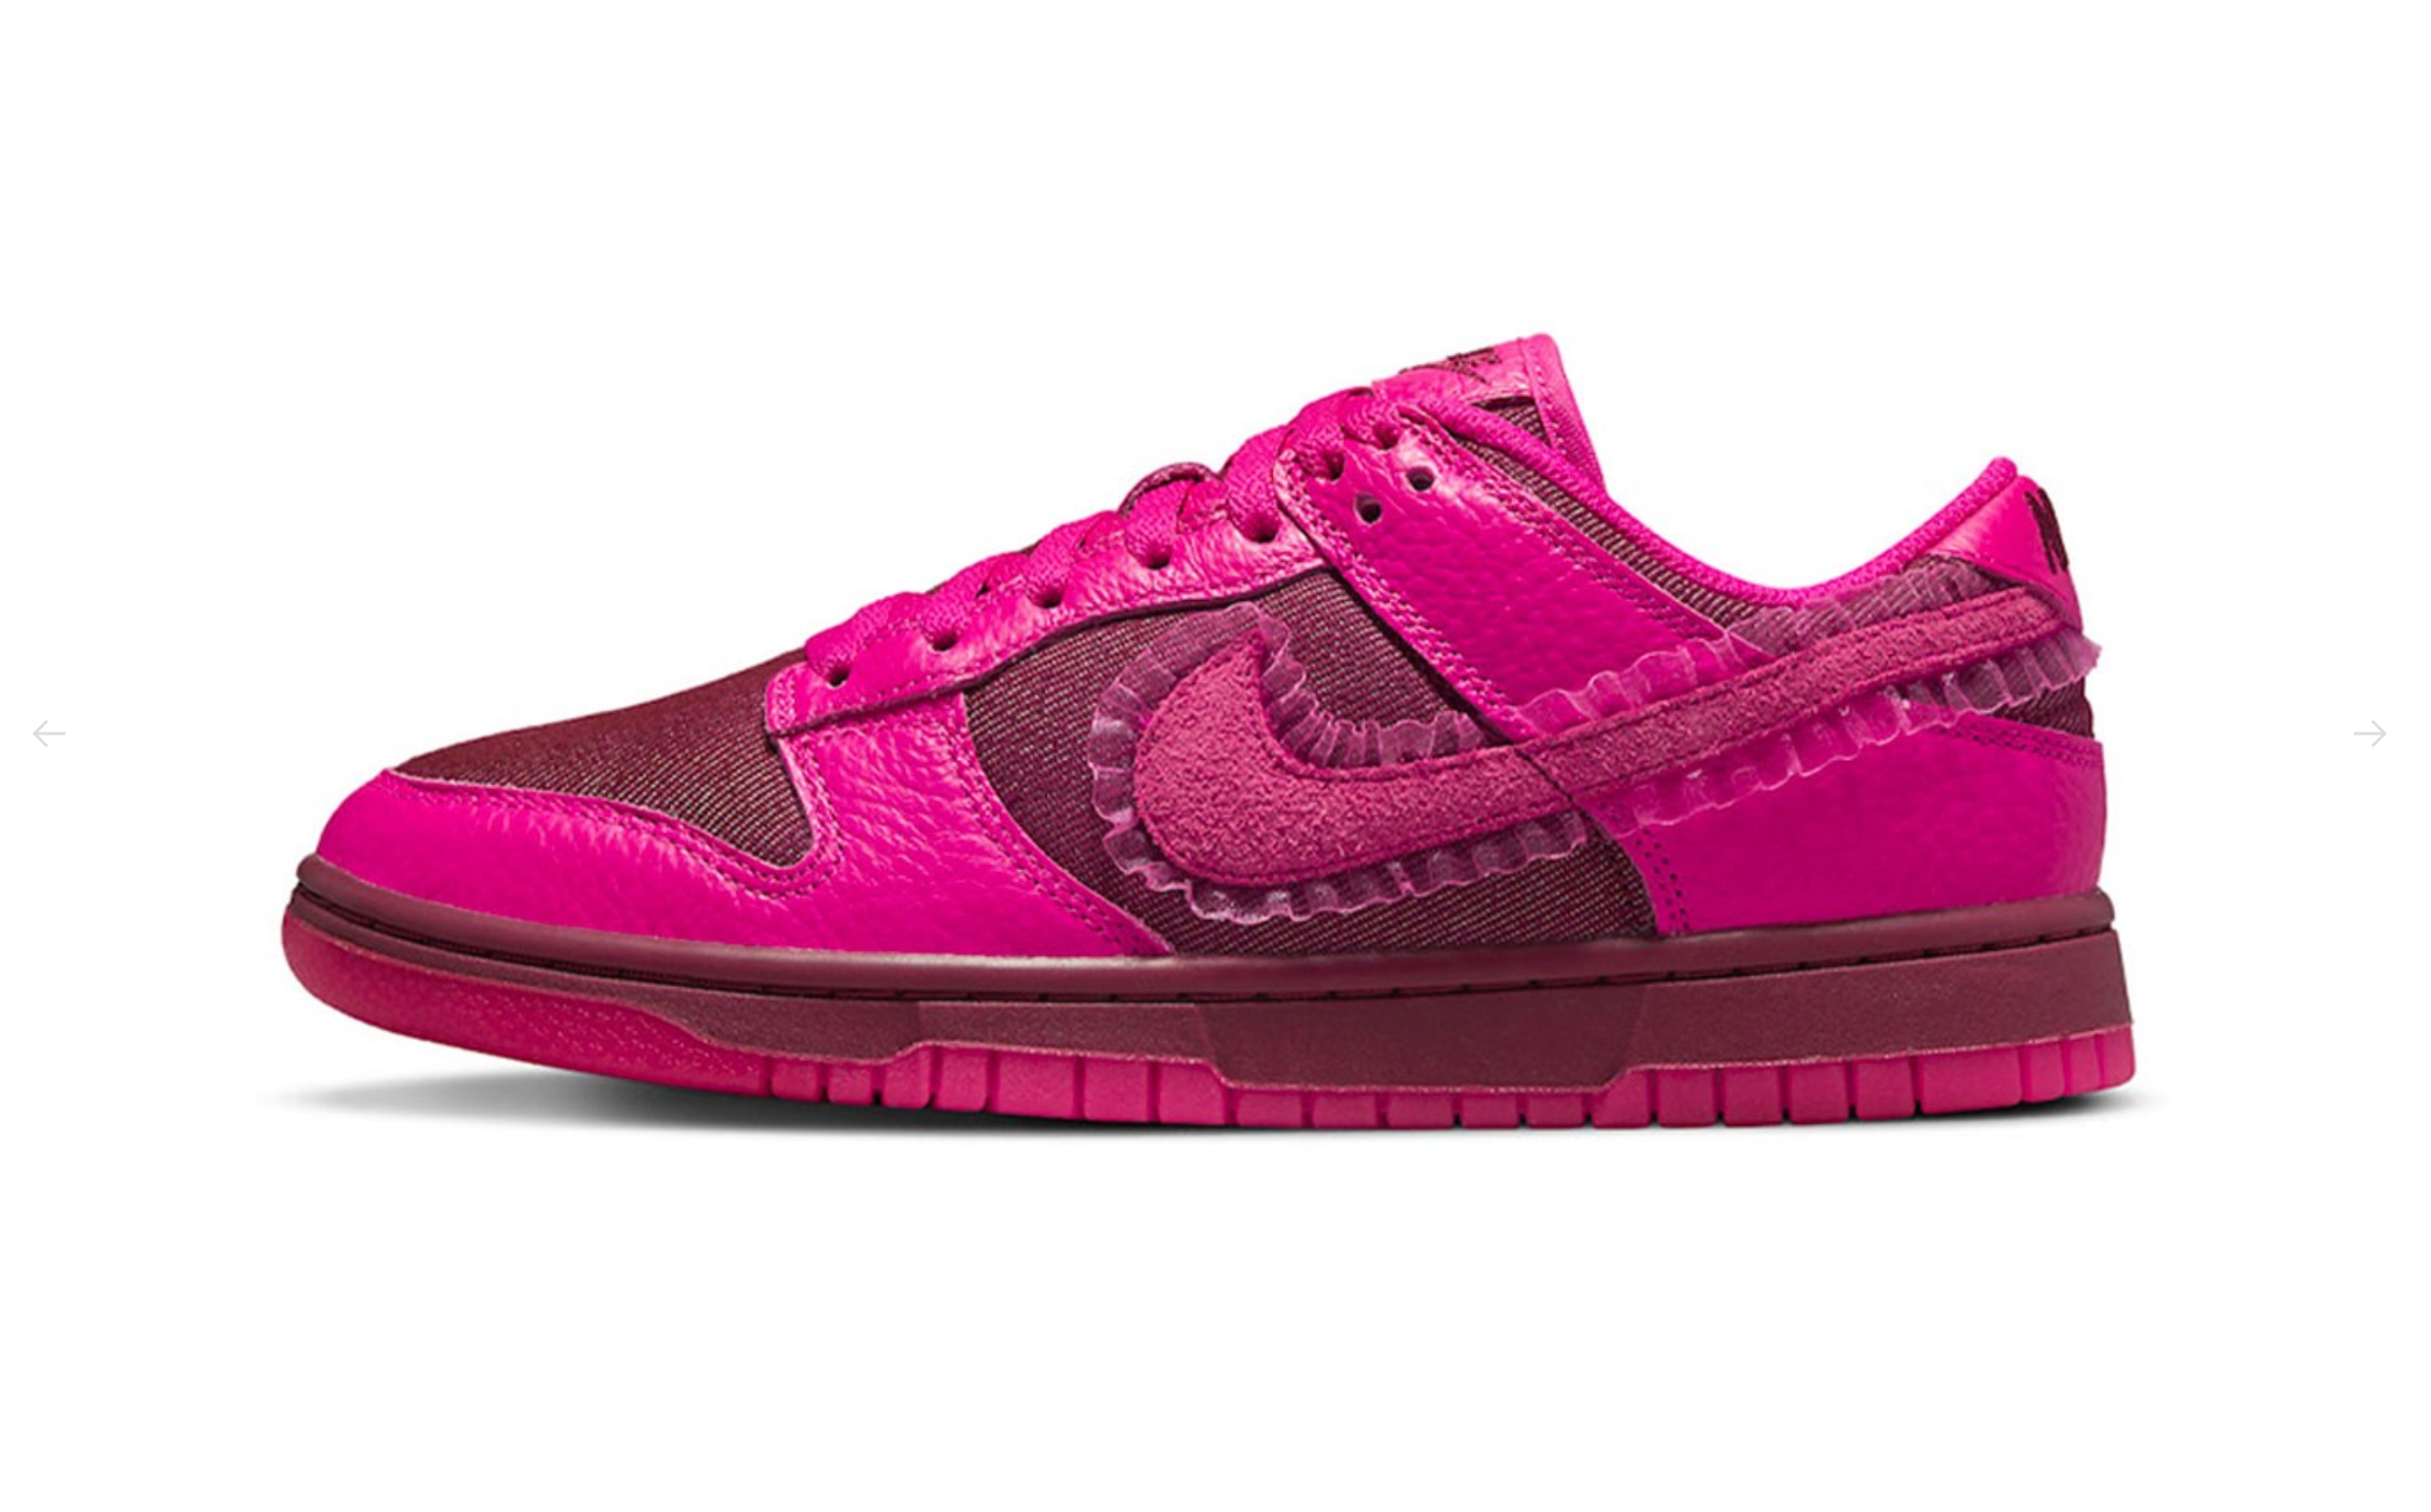 Nike Dunk Low Gets a "Valentine's Day" Treatment